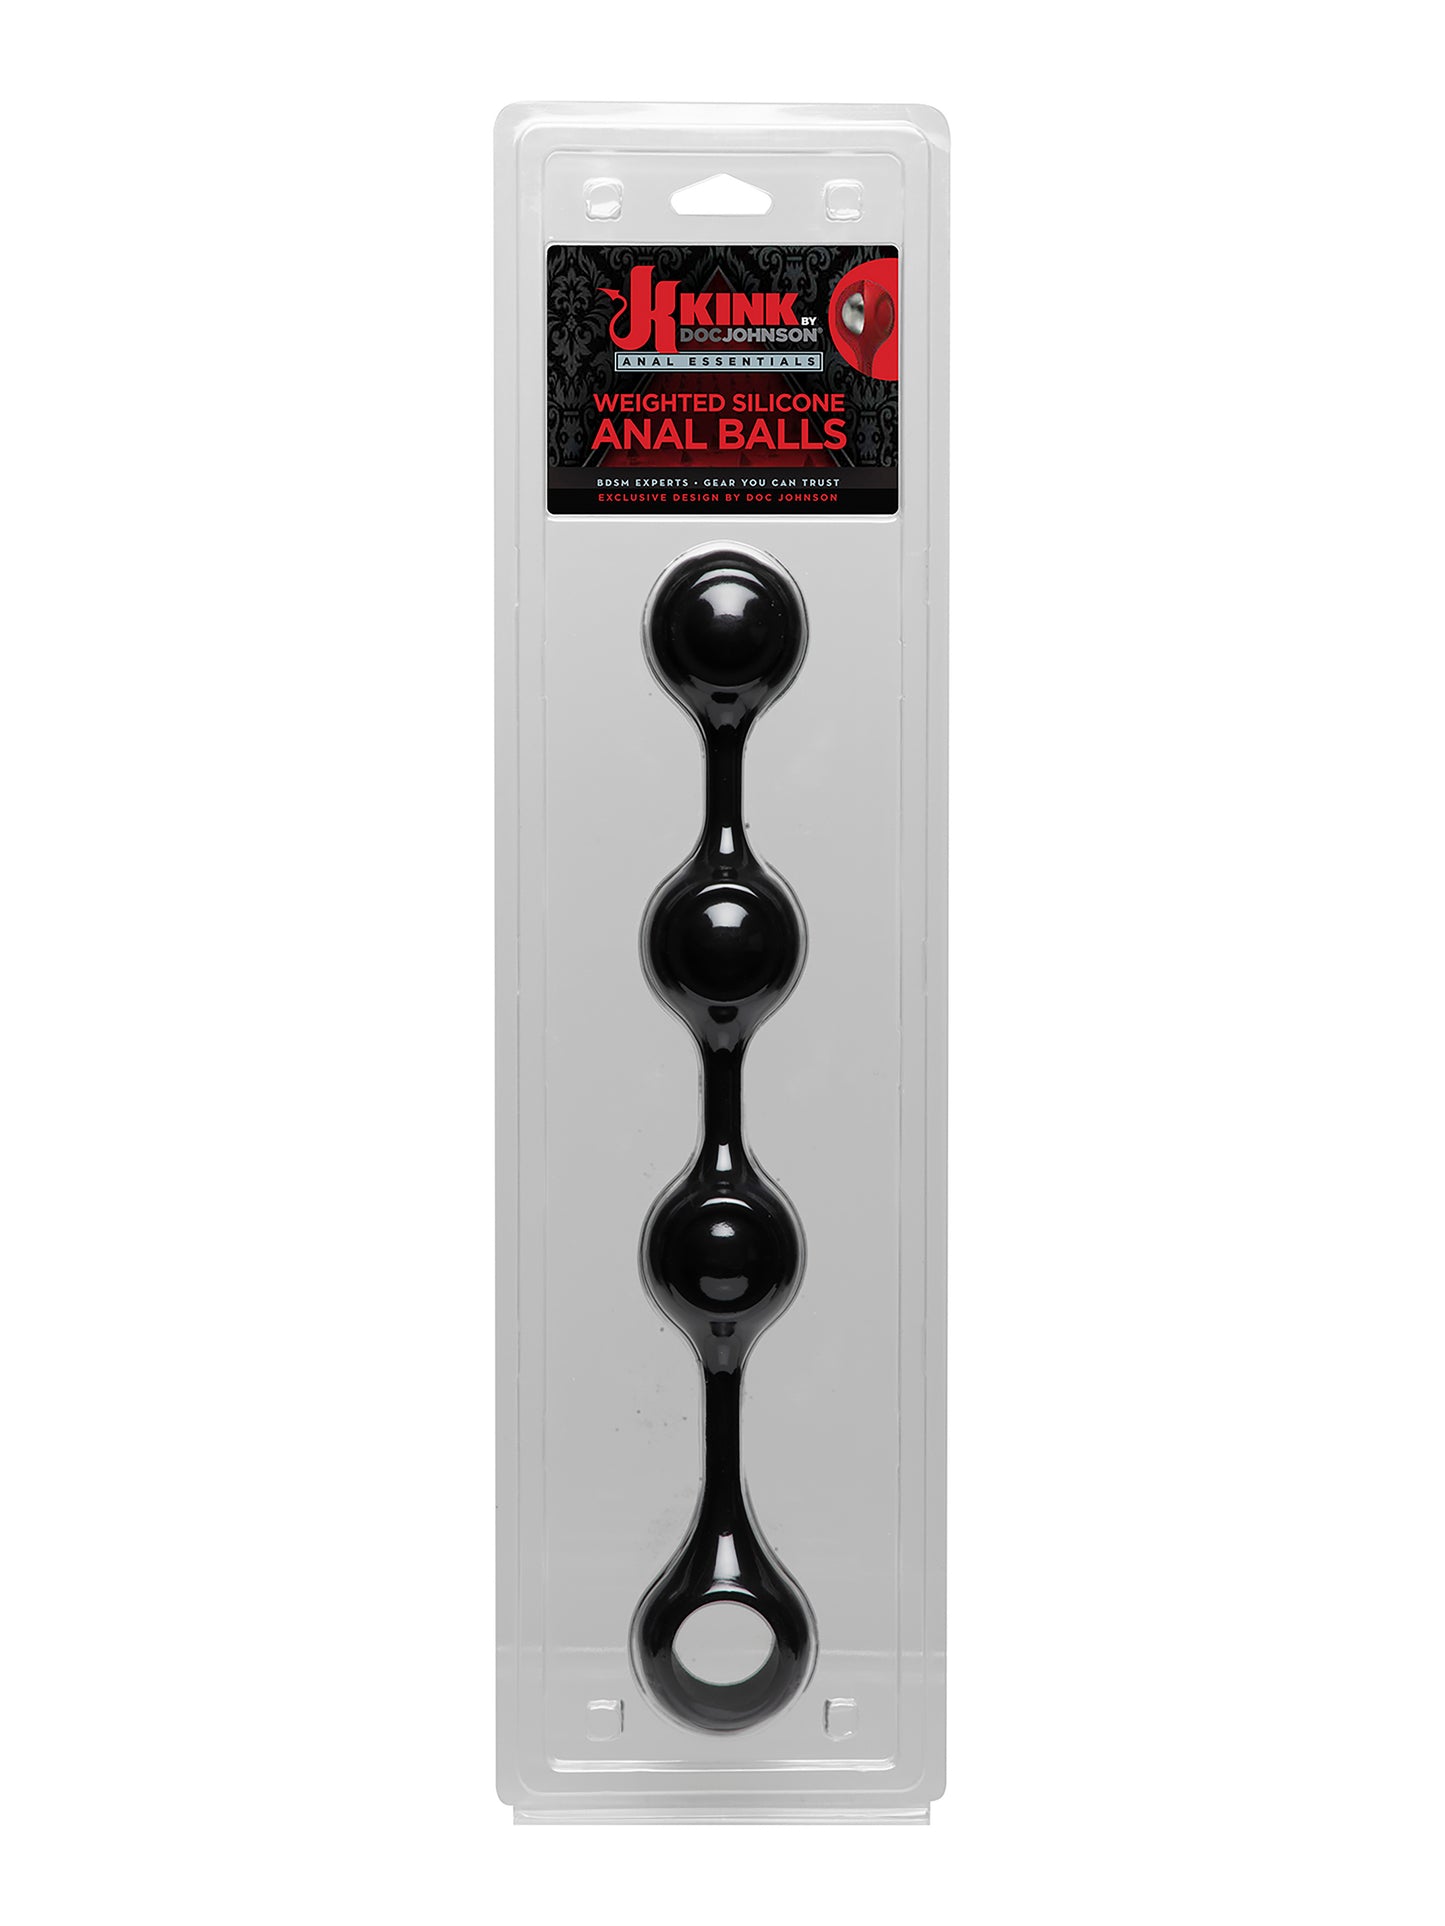 Kink by Doc Johnson Weighted Silicone Anal Balls